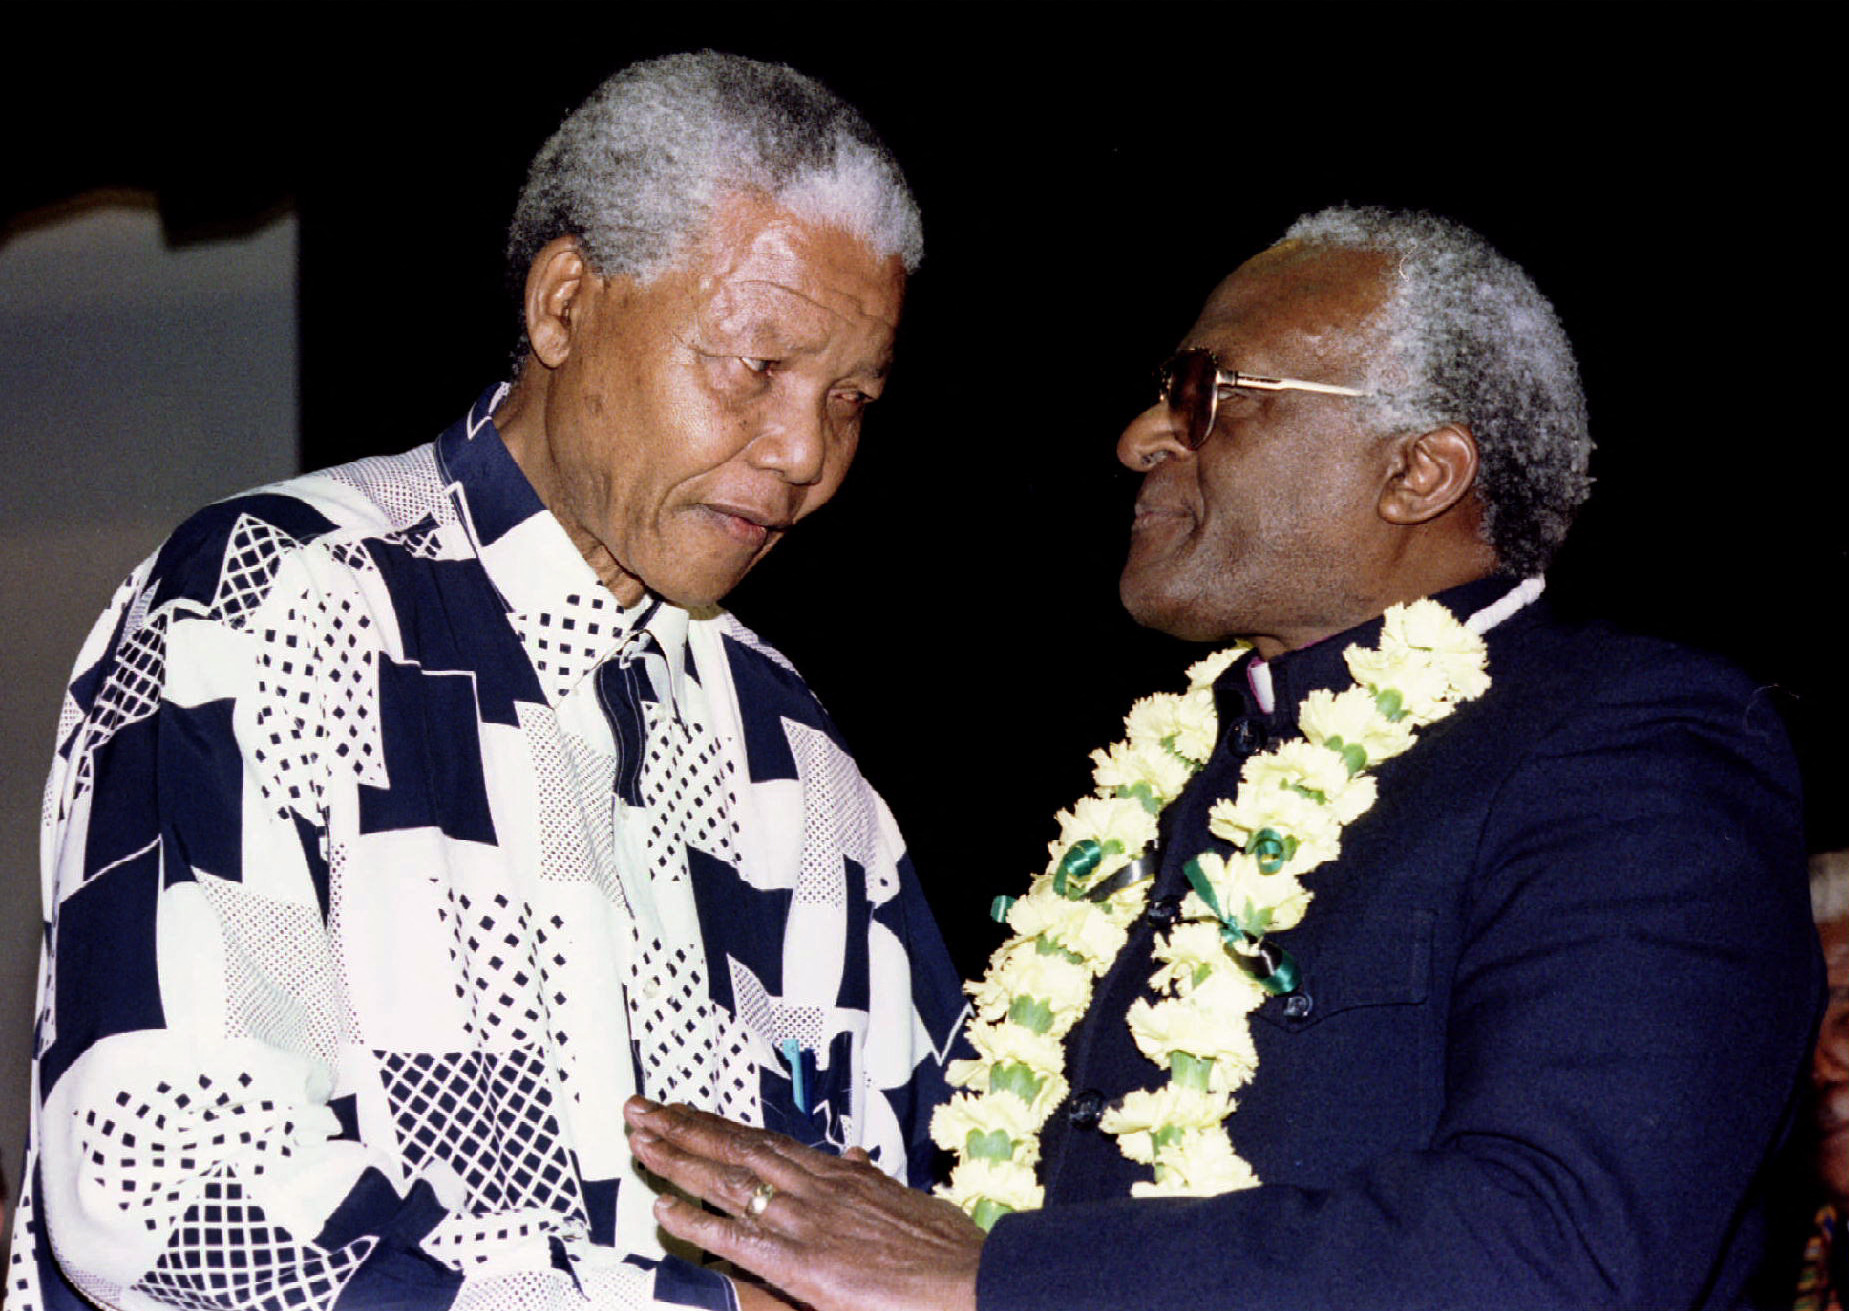 South African President Nelson Mandela shares a moment with Anglican Archbishop Desmond Tutu ahead of the 10th Desmond Tutu Peace Lecture August 6